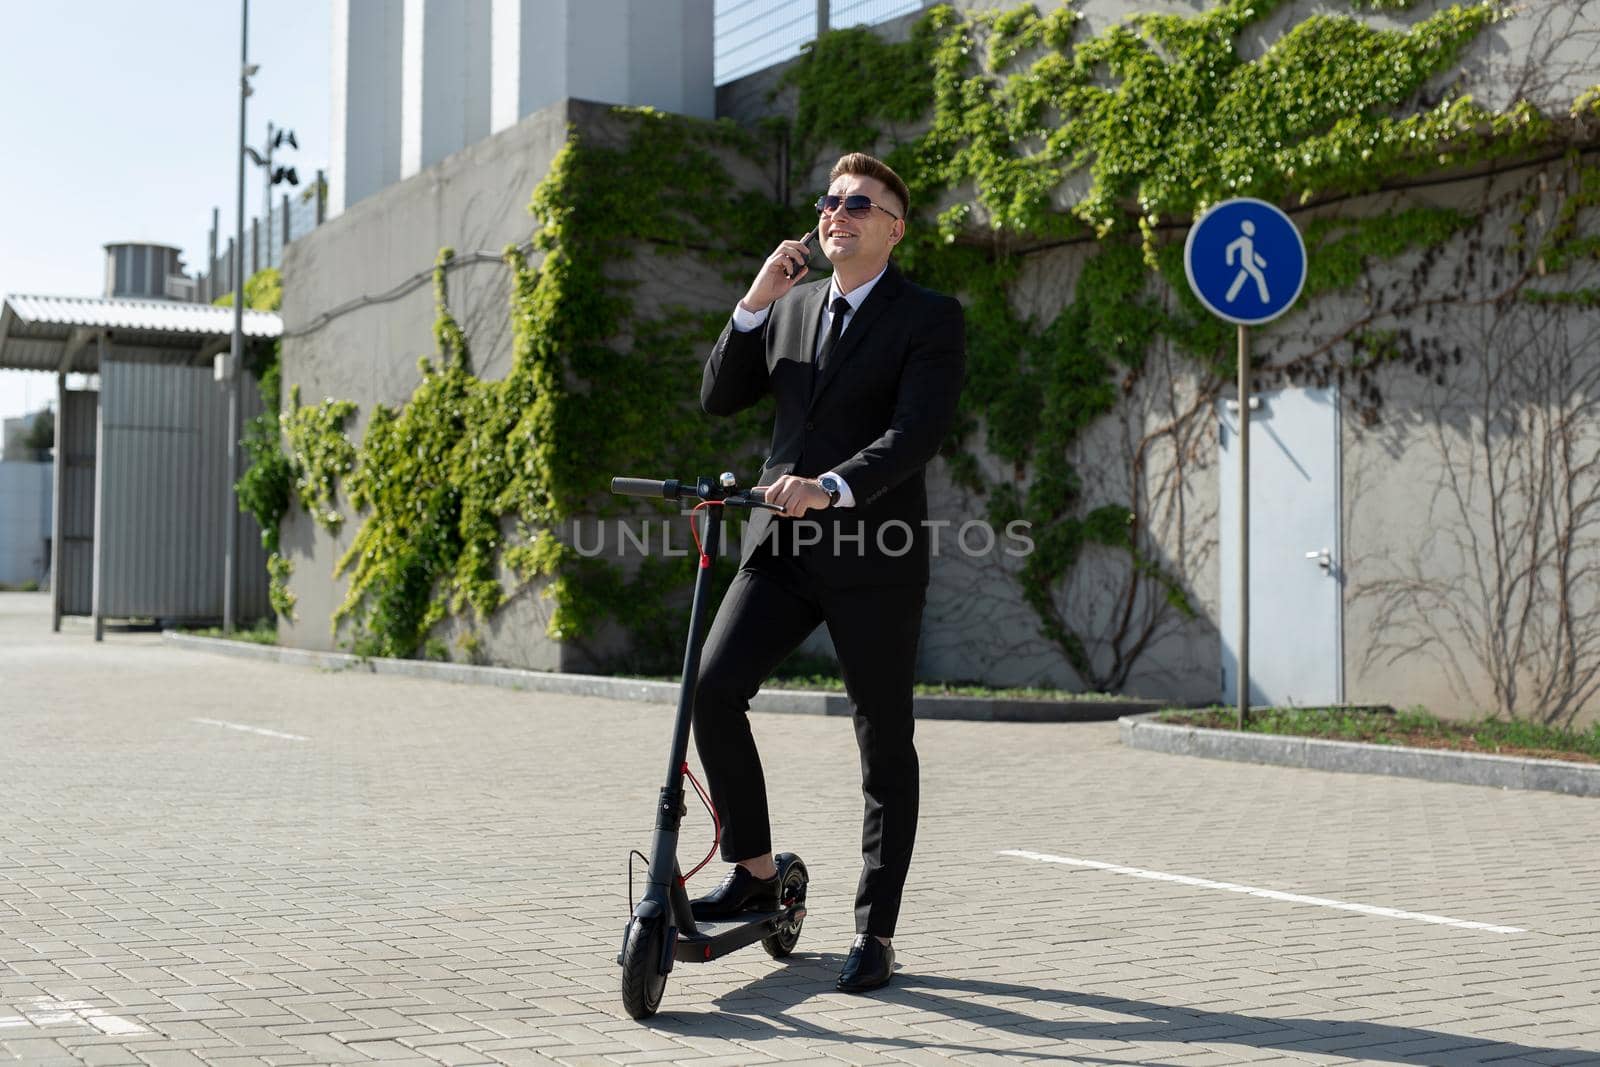 Man in a black business suit stands next to an electric scooter and talks on the phone by StudioPeace